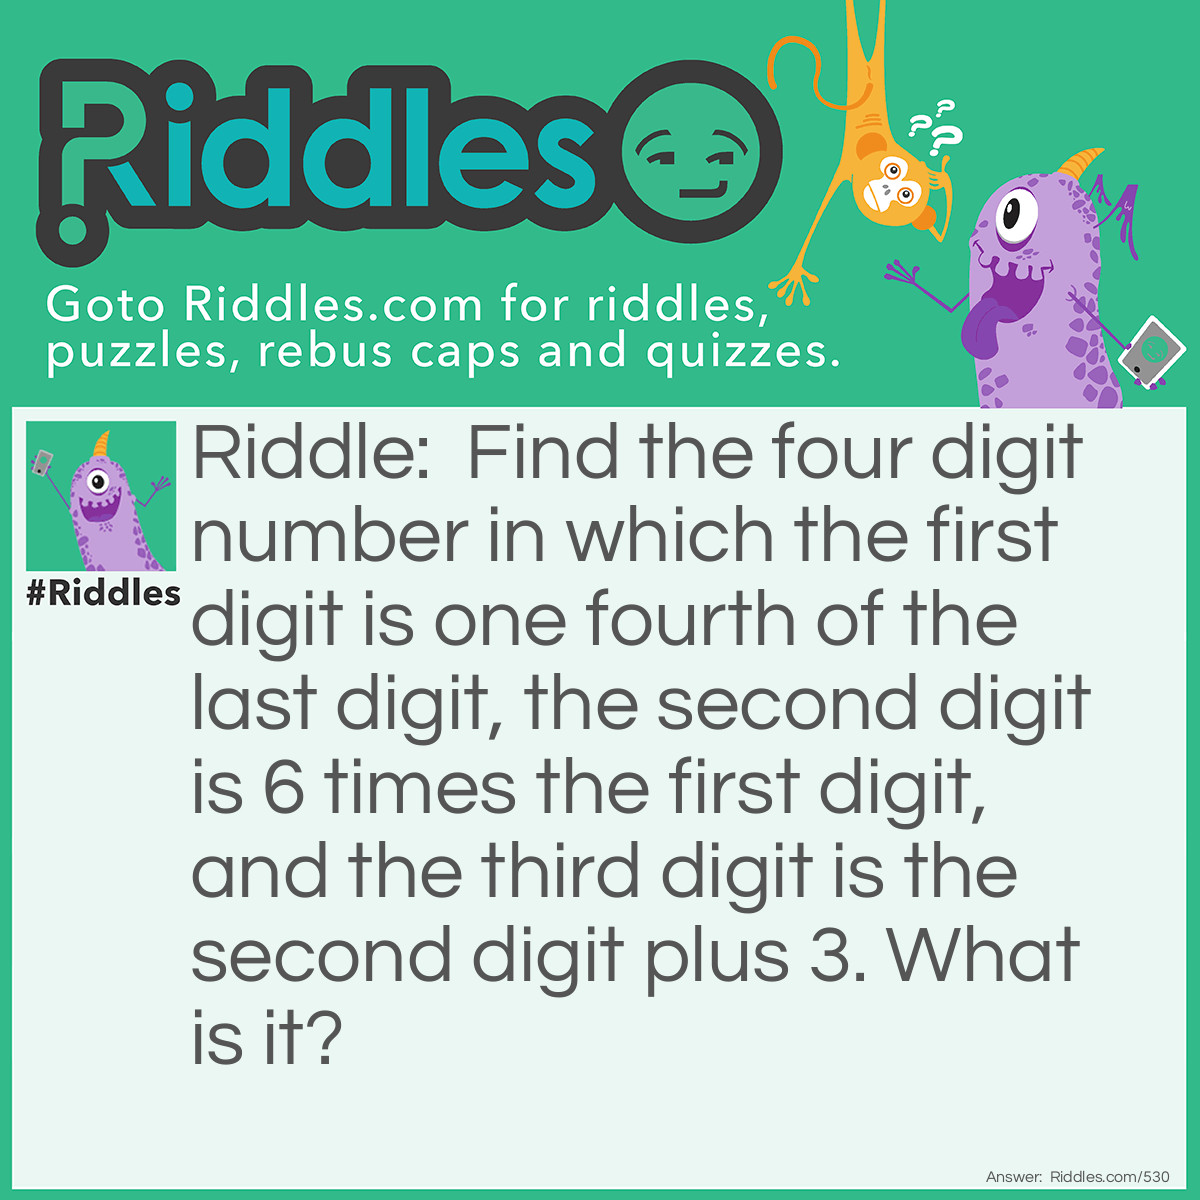 Riddle: Find the four digit number in which the first digit is one fourth of the last digit, the second digit is 6 times the first digit, and the third digit is the second digit plus 3. What is it? Answer: 1694.